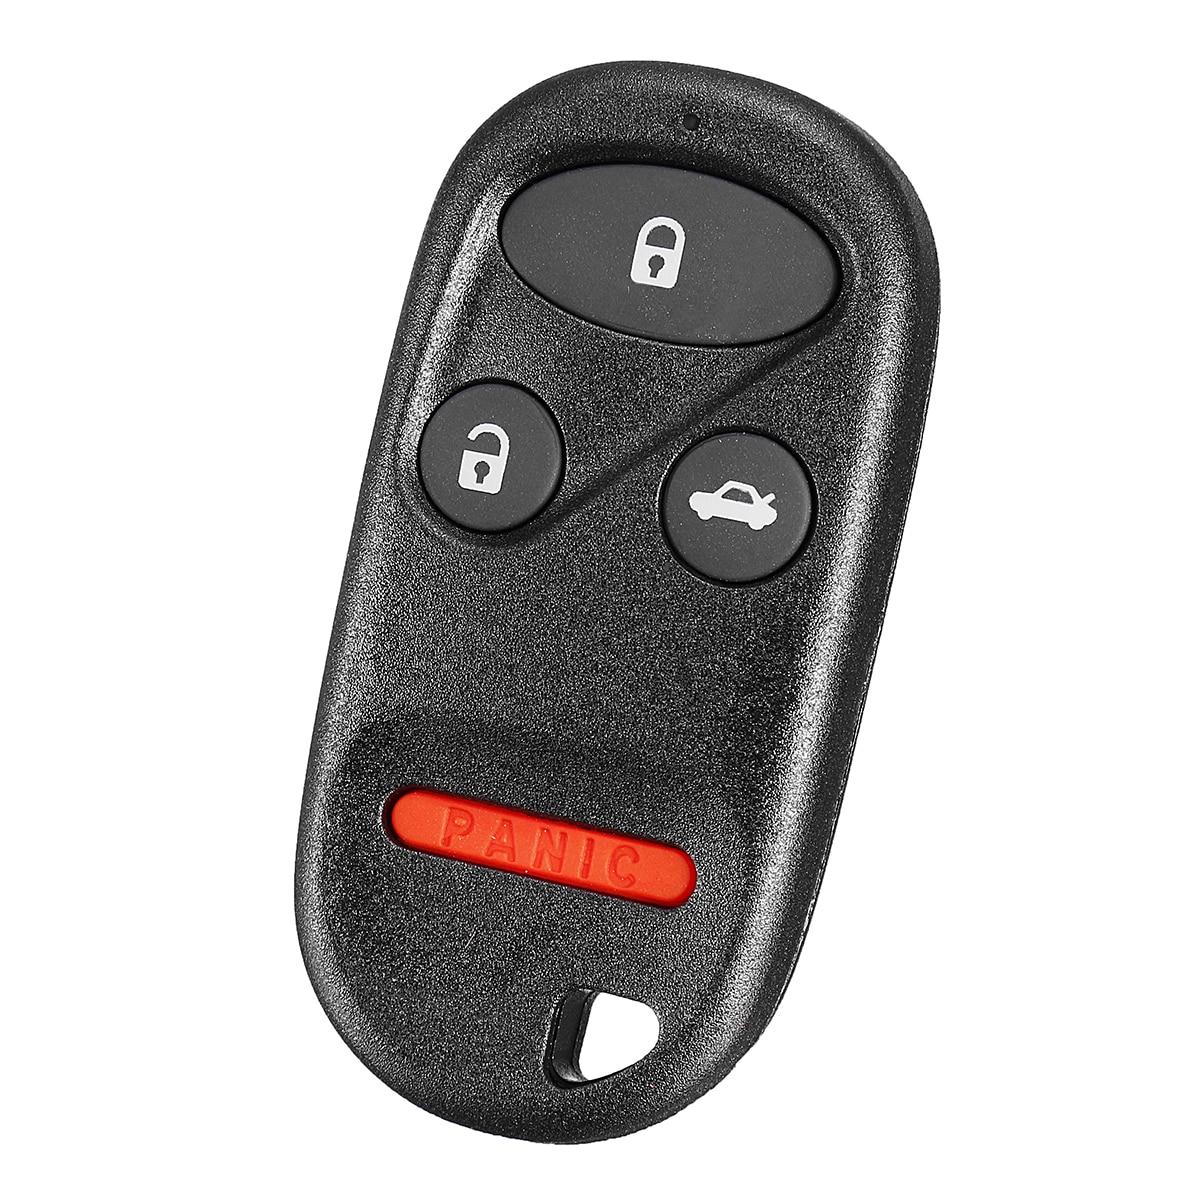 434MHz 4 Buttons Remote Key Fob Case Shell& Battery for Honda Civic ...